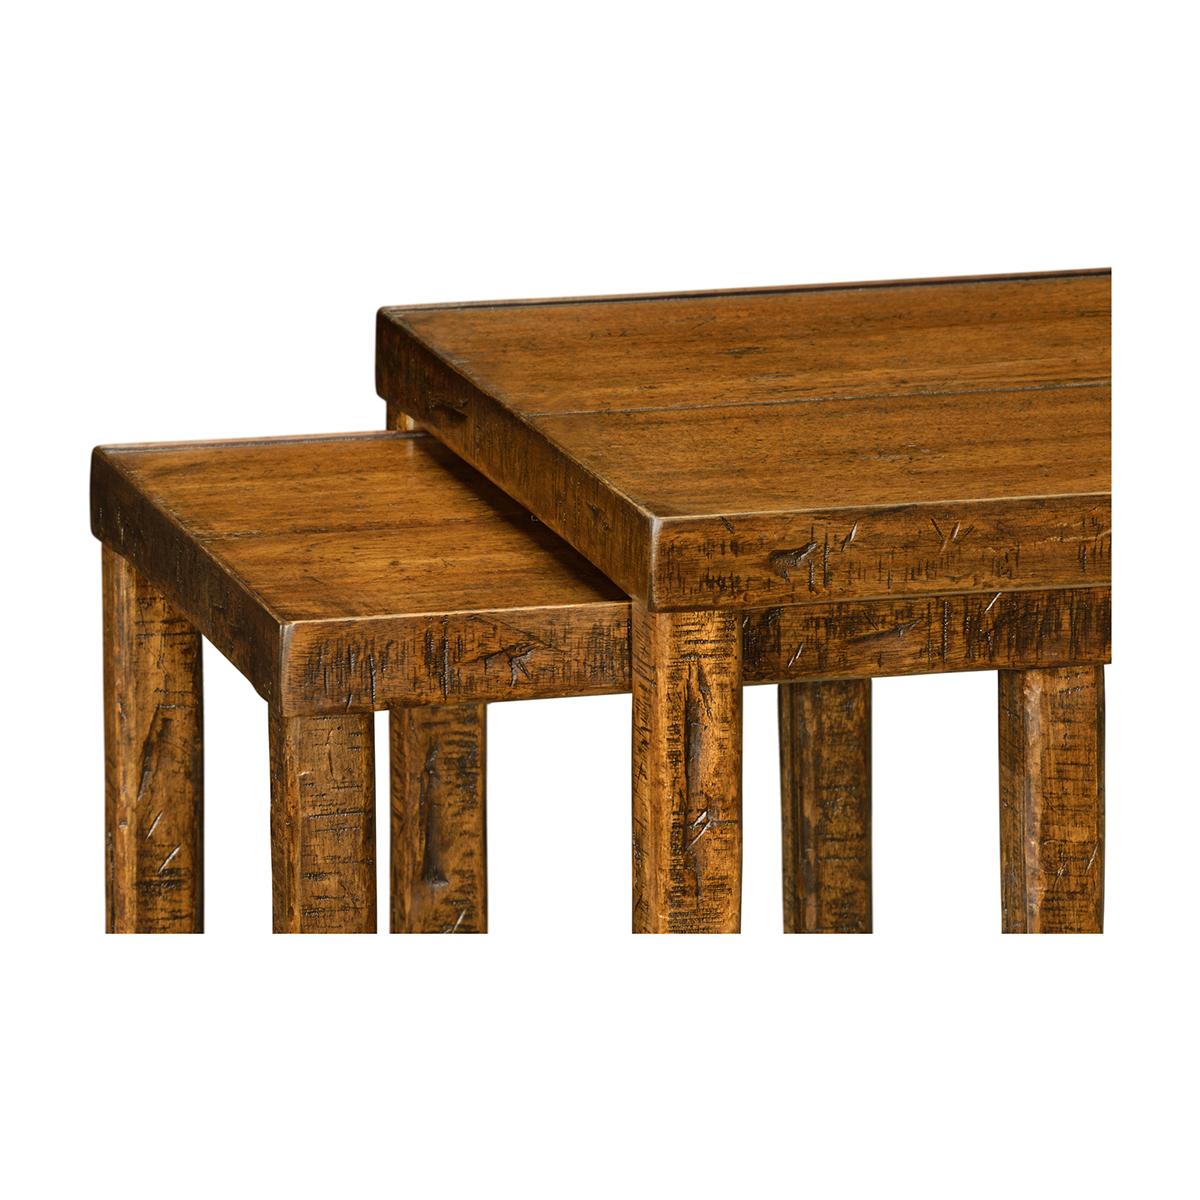 Rustic Country Nesting Tables, Walnut Finish In New Condition For Sale In Westwood, NJ